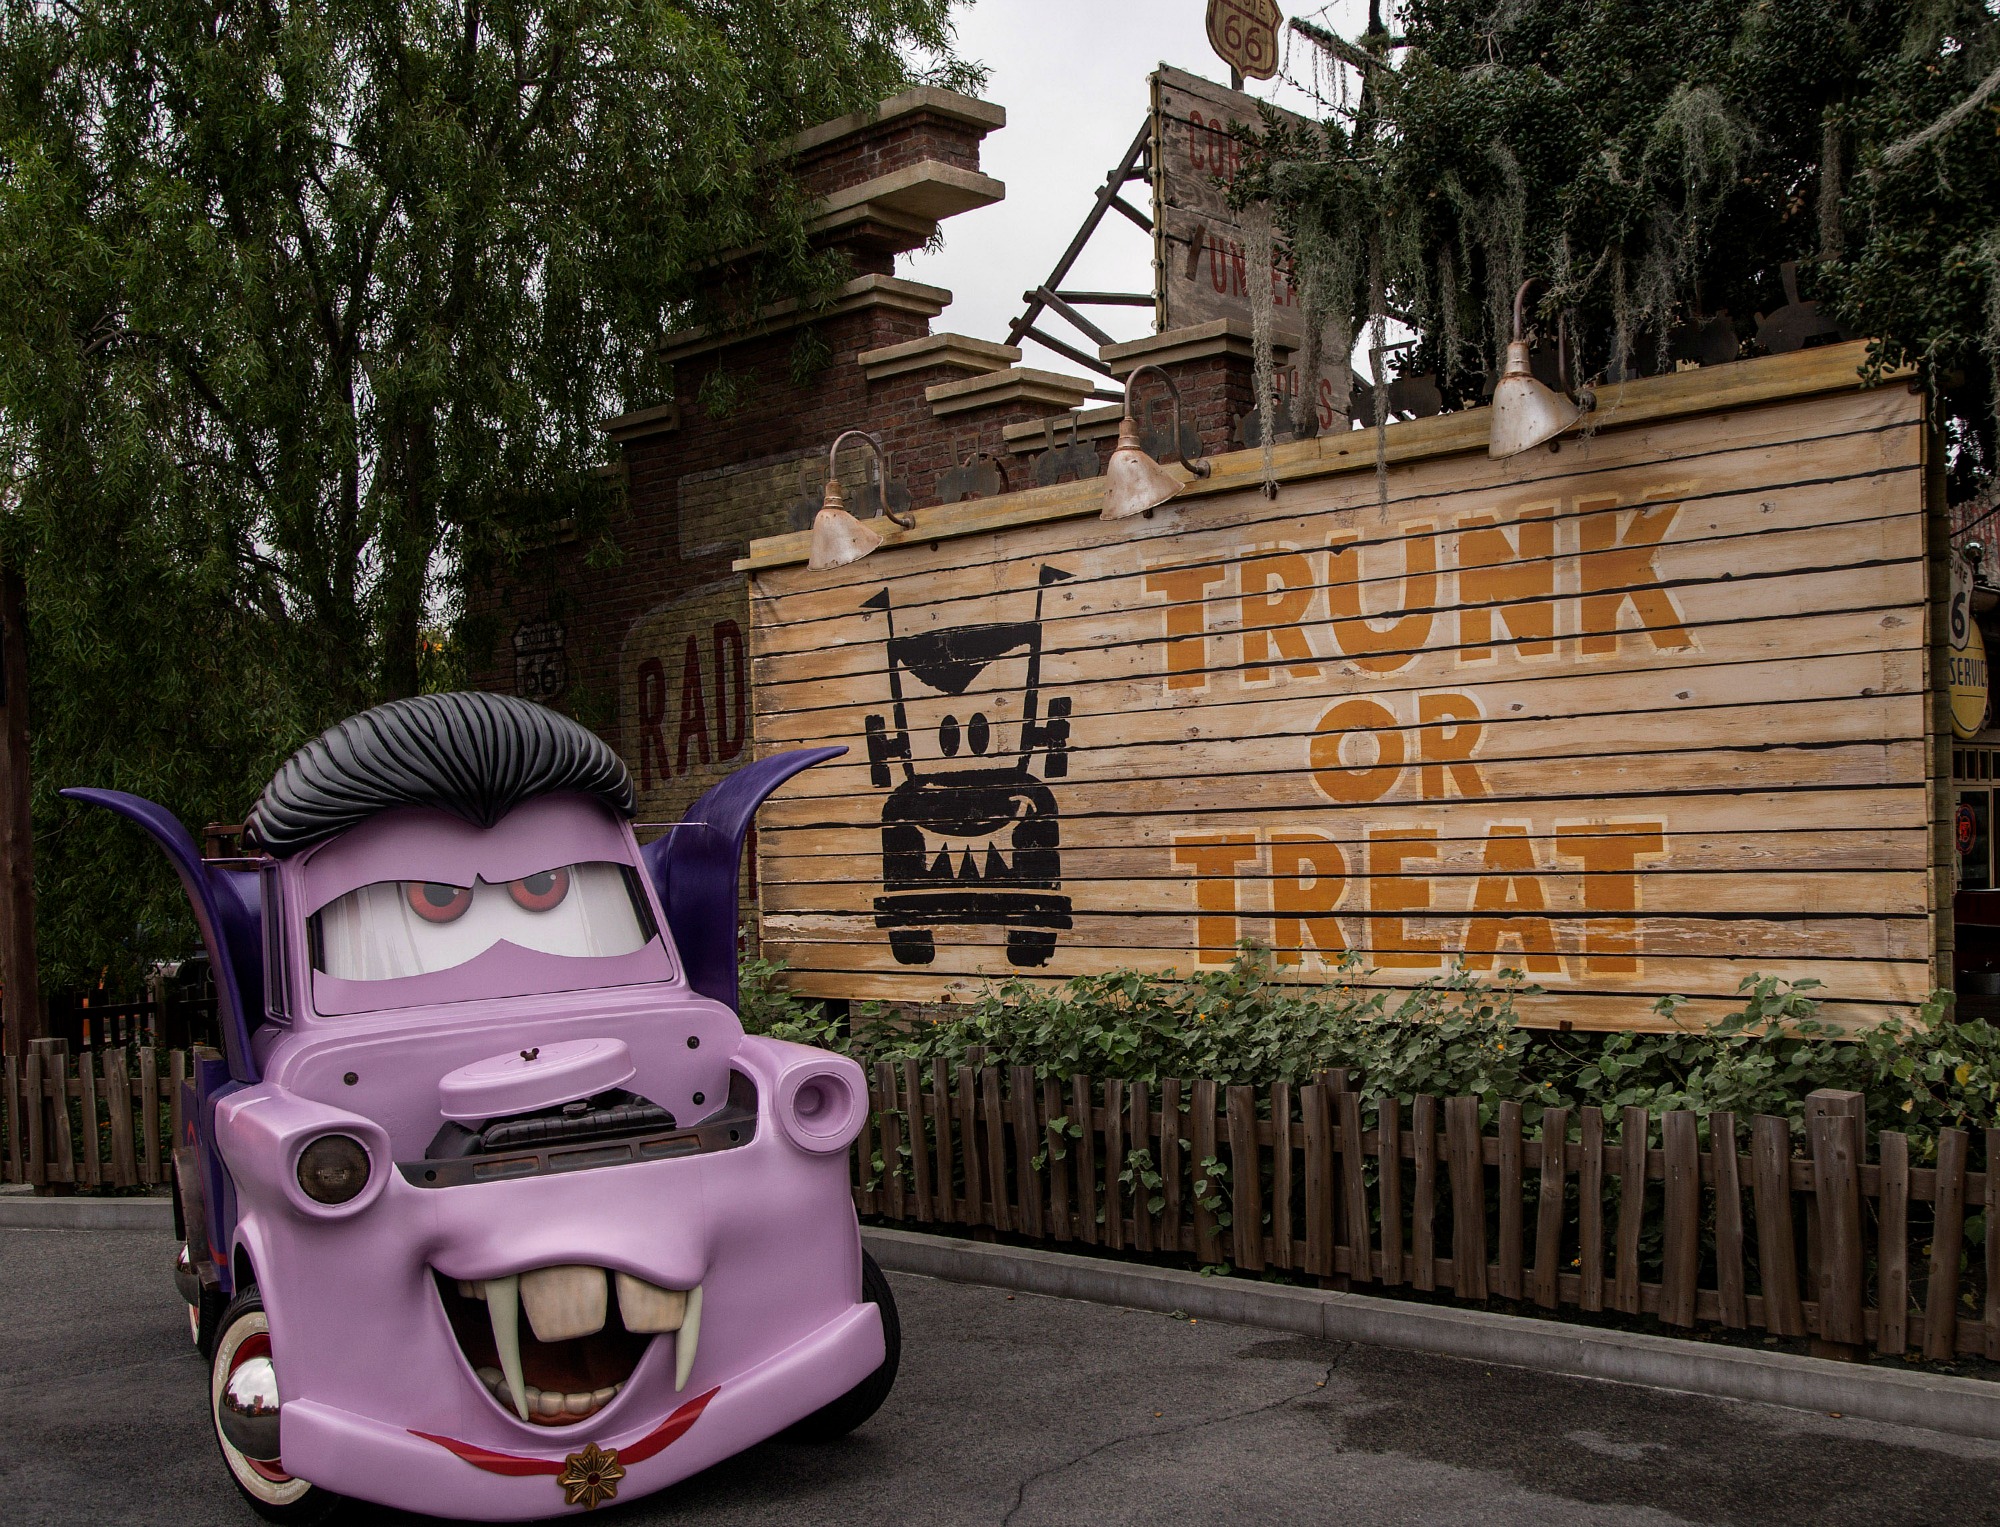 CARS LAND HAUL-O-WEEN - Everyone’s favorite Cars characters have transformed Radiator Springs into their own Haul-O-Ween celebration during Halloween Time at the Disneyland Resort. For the first time, the Cars characters will be donning their Halloween “car-stumes” as they greet guests and prepare to go “trunk-or-treating.” Mater will be wearing his vampire or “van-pire” outfit, while Lightning McQueen is dressed as a super hero. Cruz Ramirez, Red the Fire Truck and DJ get dressed up as a pirate, a clown and a punk rocker, respectively.(Joshua Sudock/Disneyland Resort)